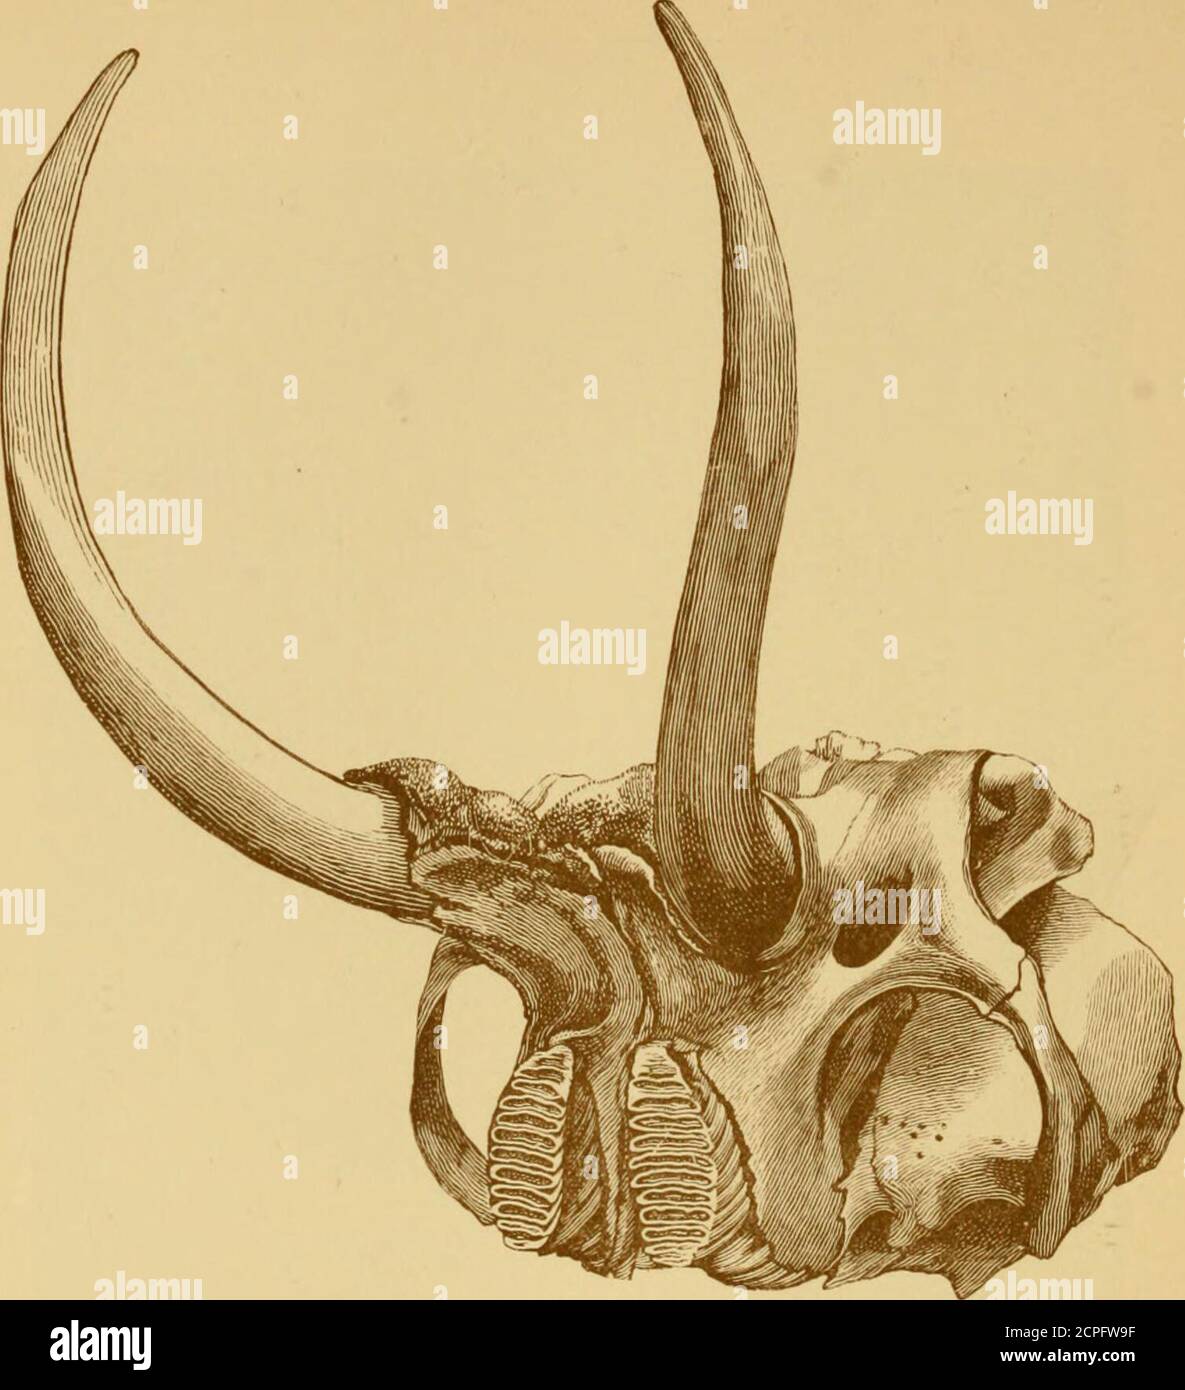 Records of big game : with their distribution, characteristics, dimensions,  weights, and horn & tusk measurements . Fivm a PkotOj^nif/l by Mr. Hales,  Ktattiiig. Skull and Horns of White  by